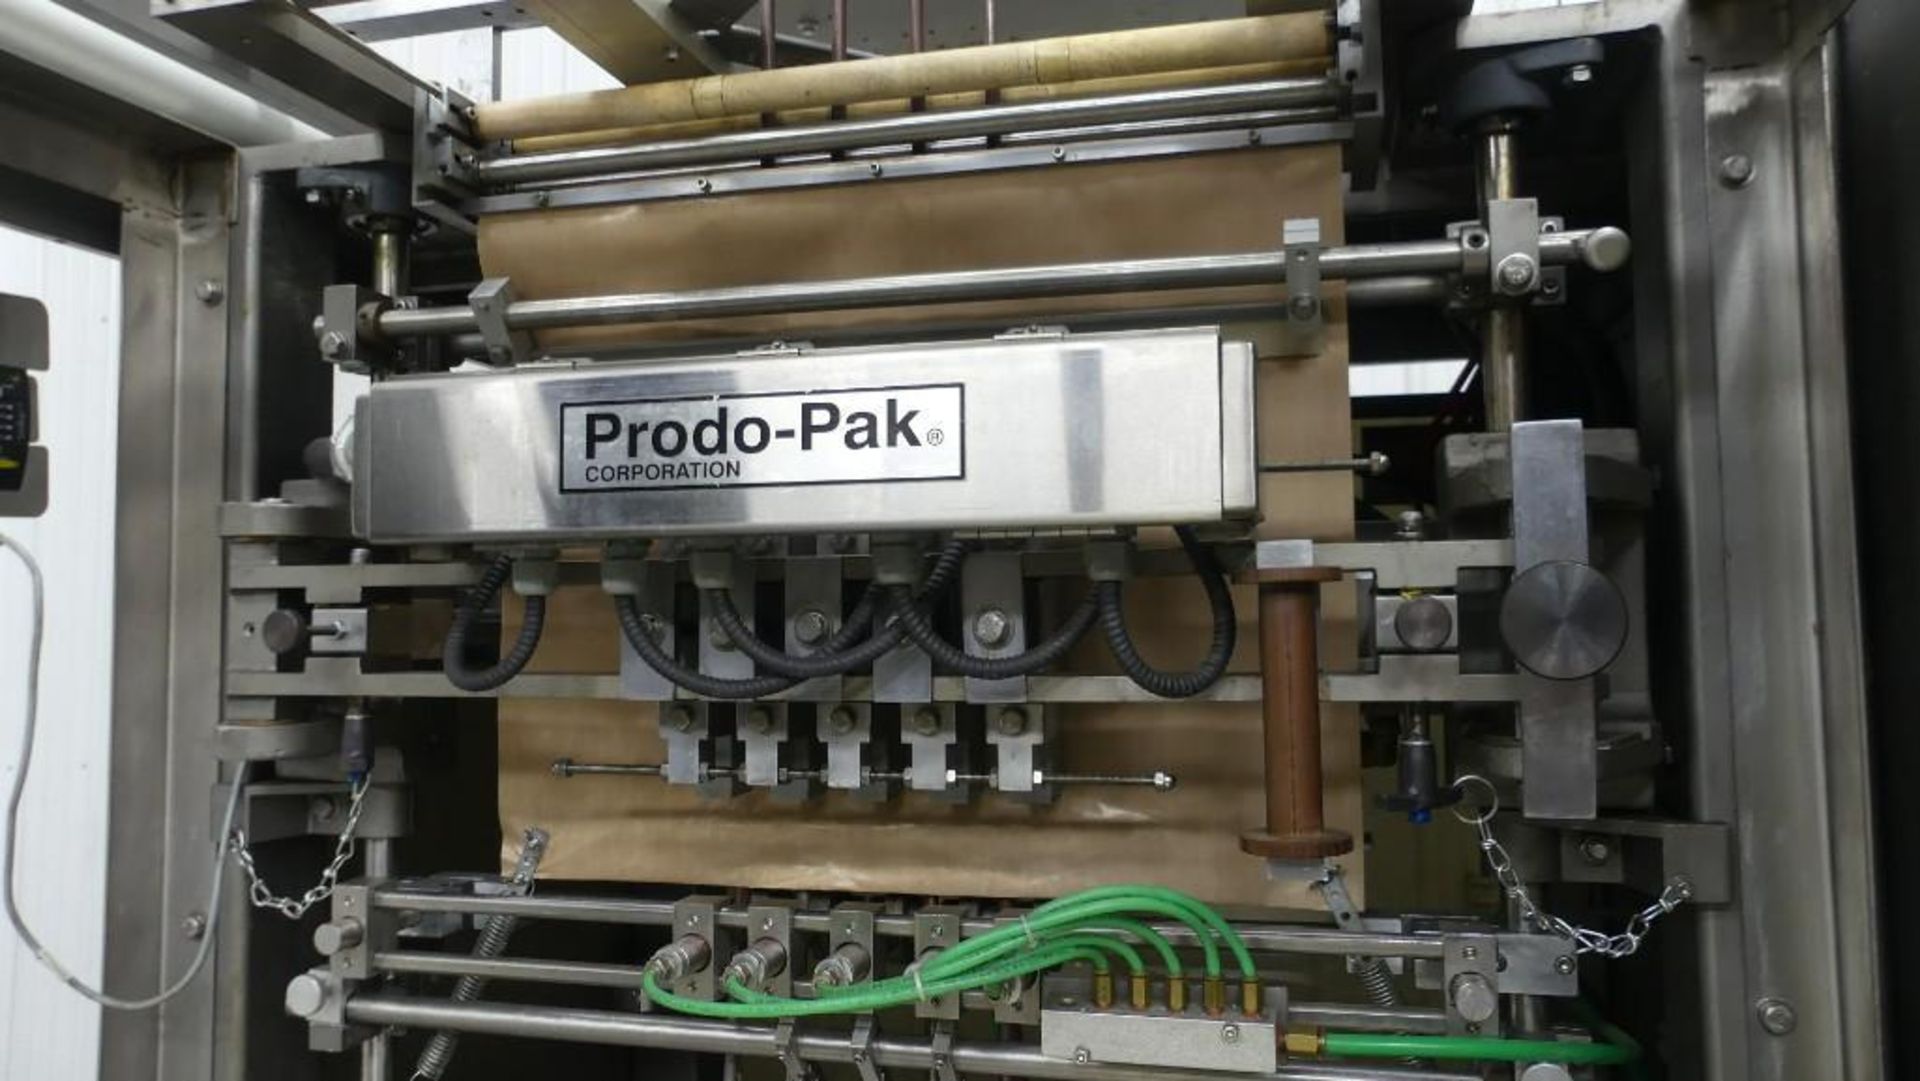 Prodo-Pak PV215-TW-2 Vertical Form Fill Seal 4 Up - Image 19 of 36